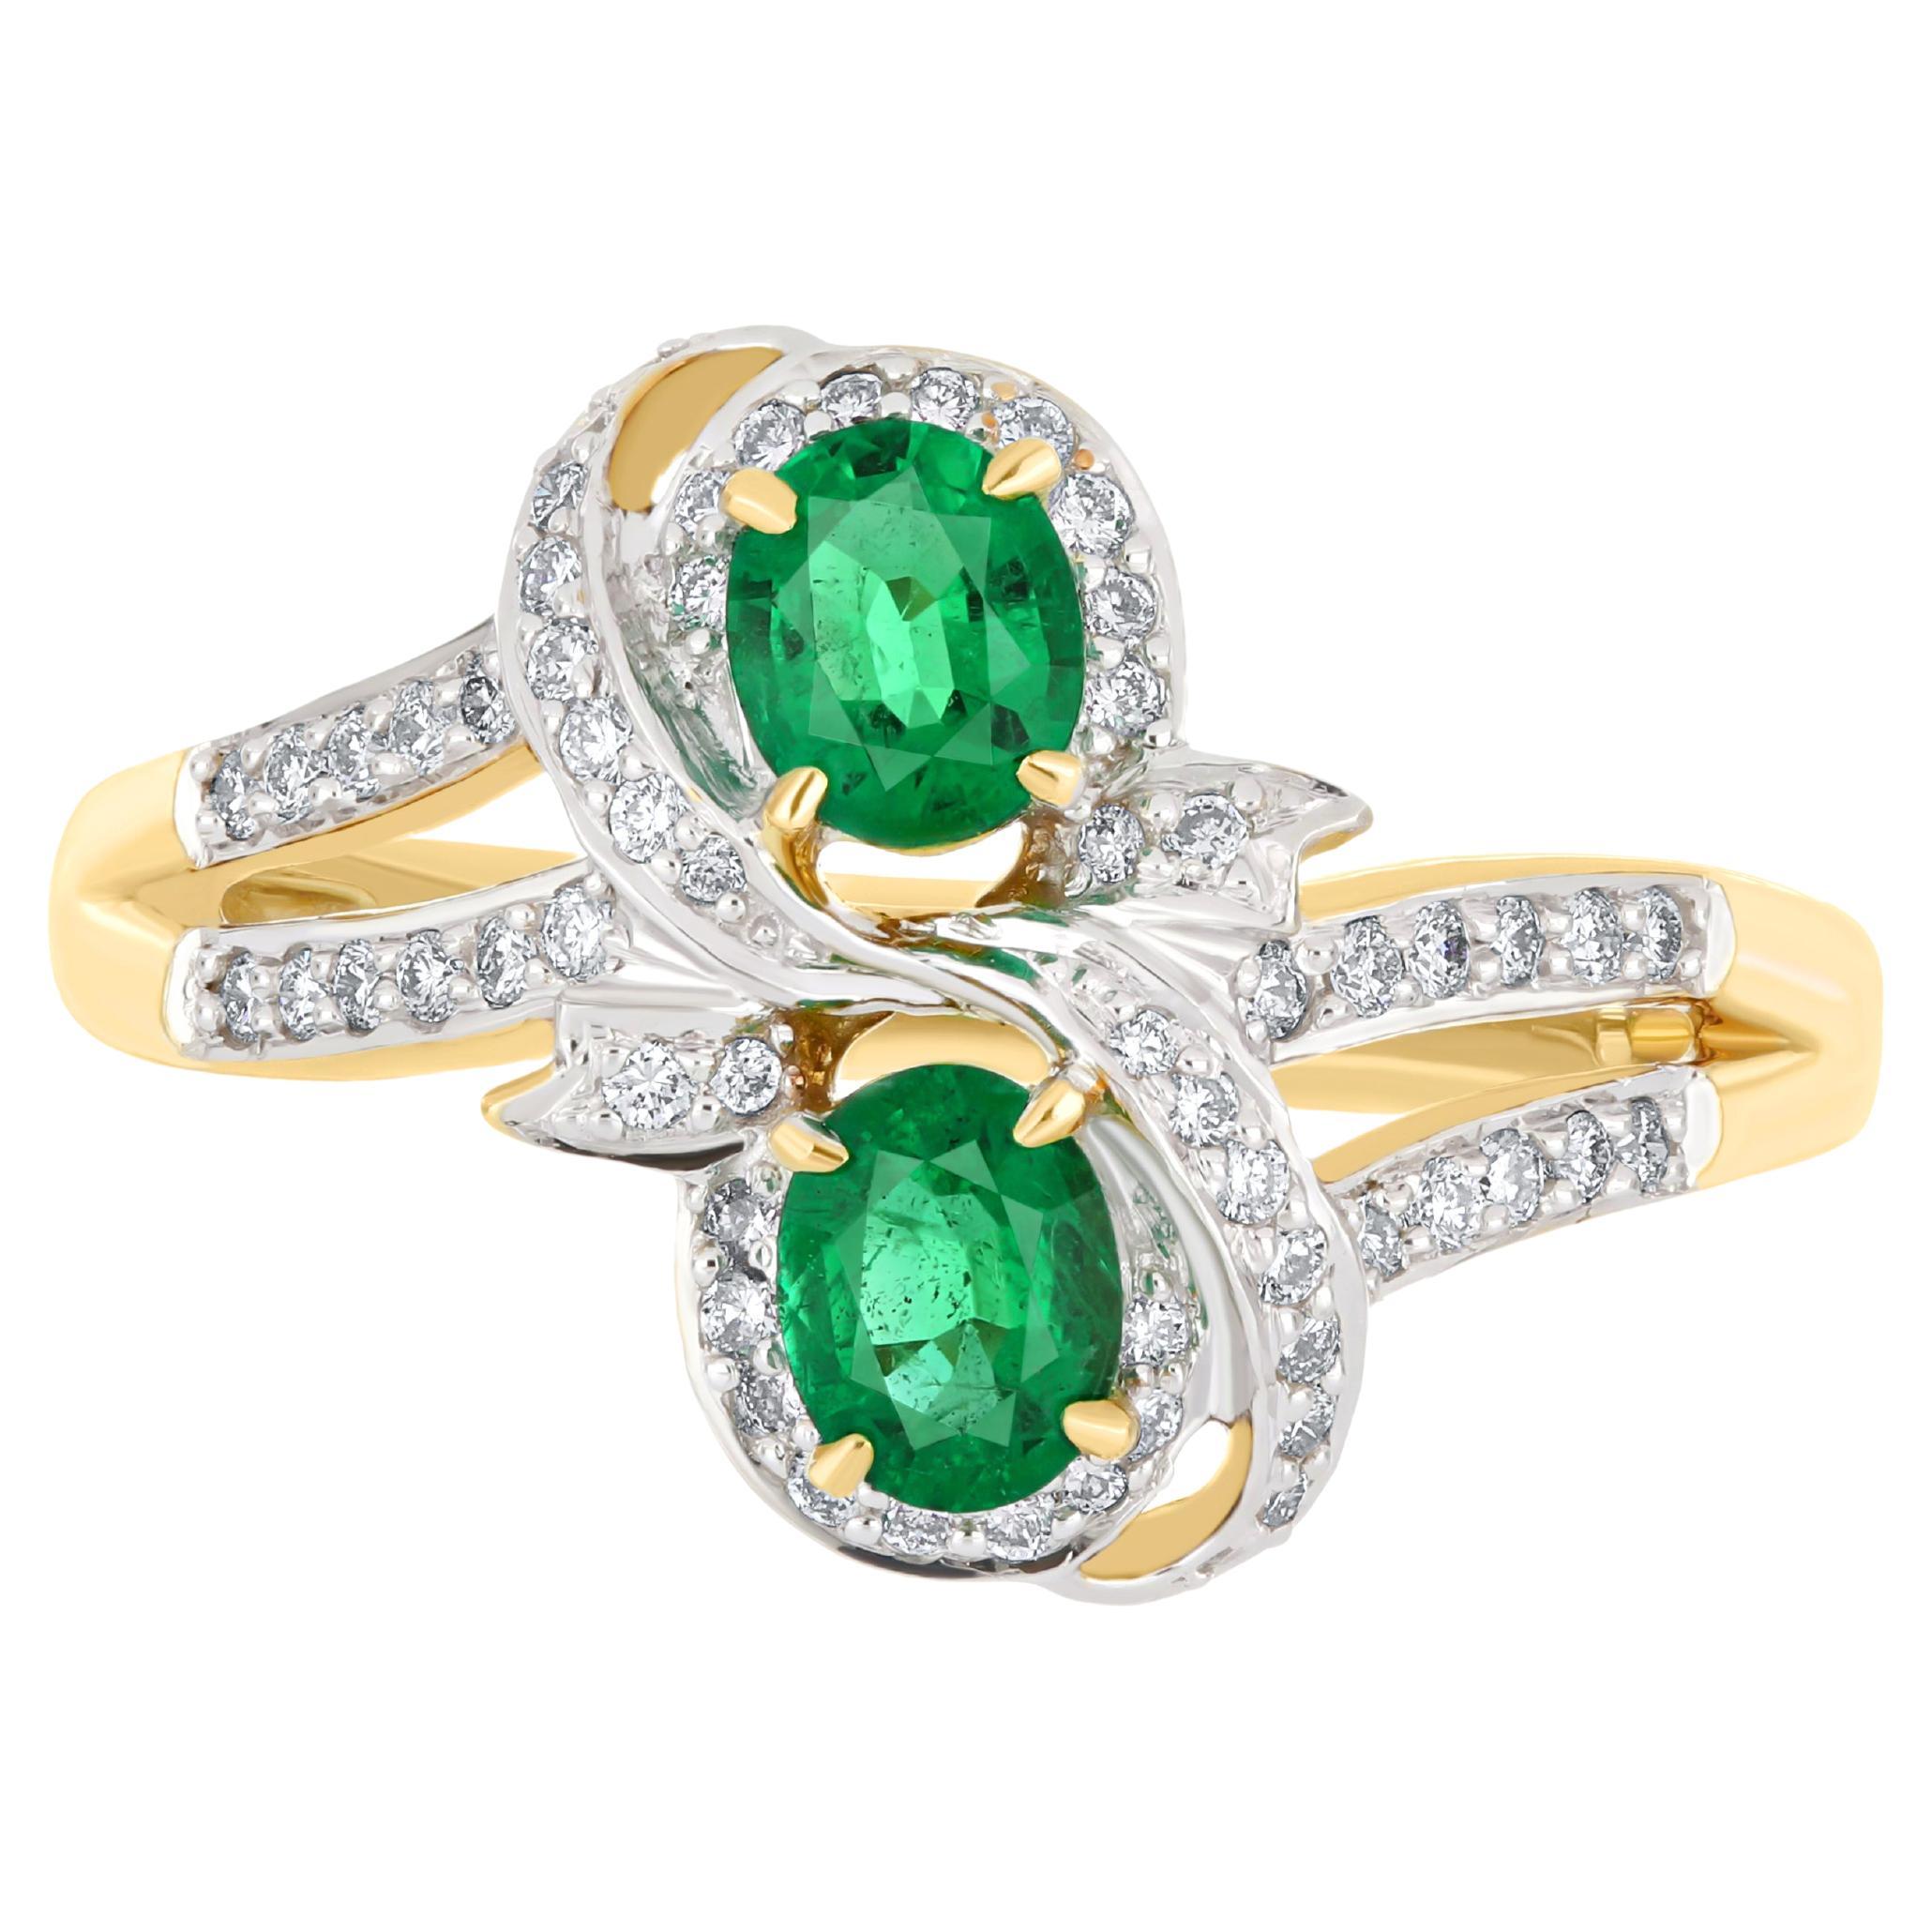 Emerald and Diamond Ring 18 Karat Yellow Gold Weddings & Party Wear Jewelry For Sale